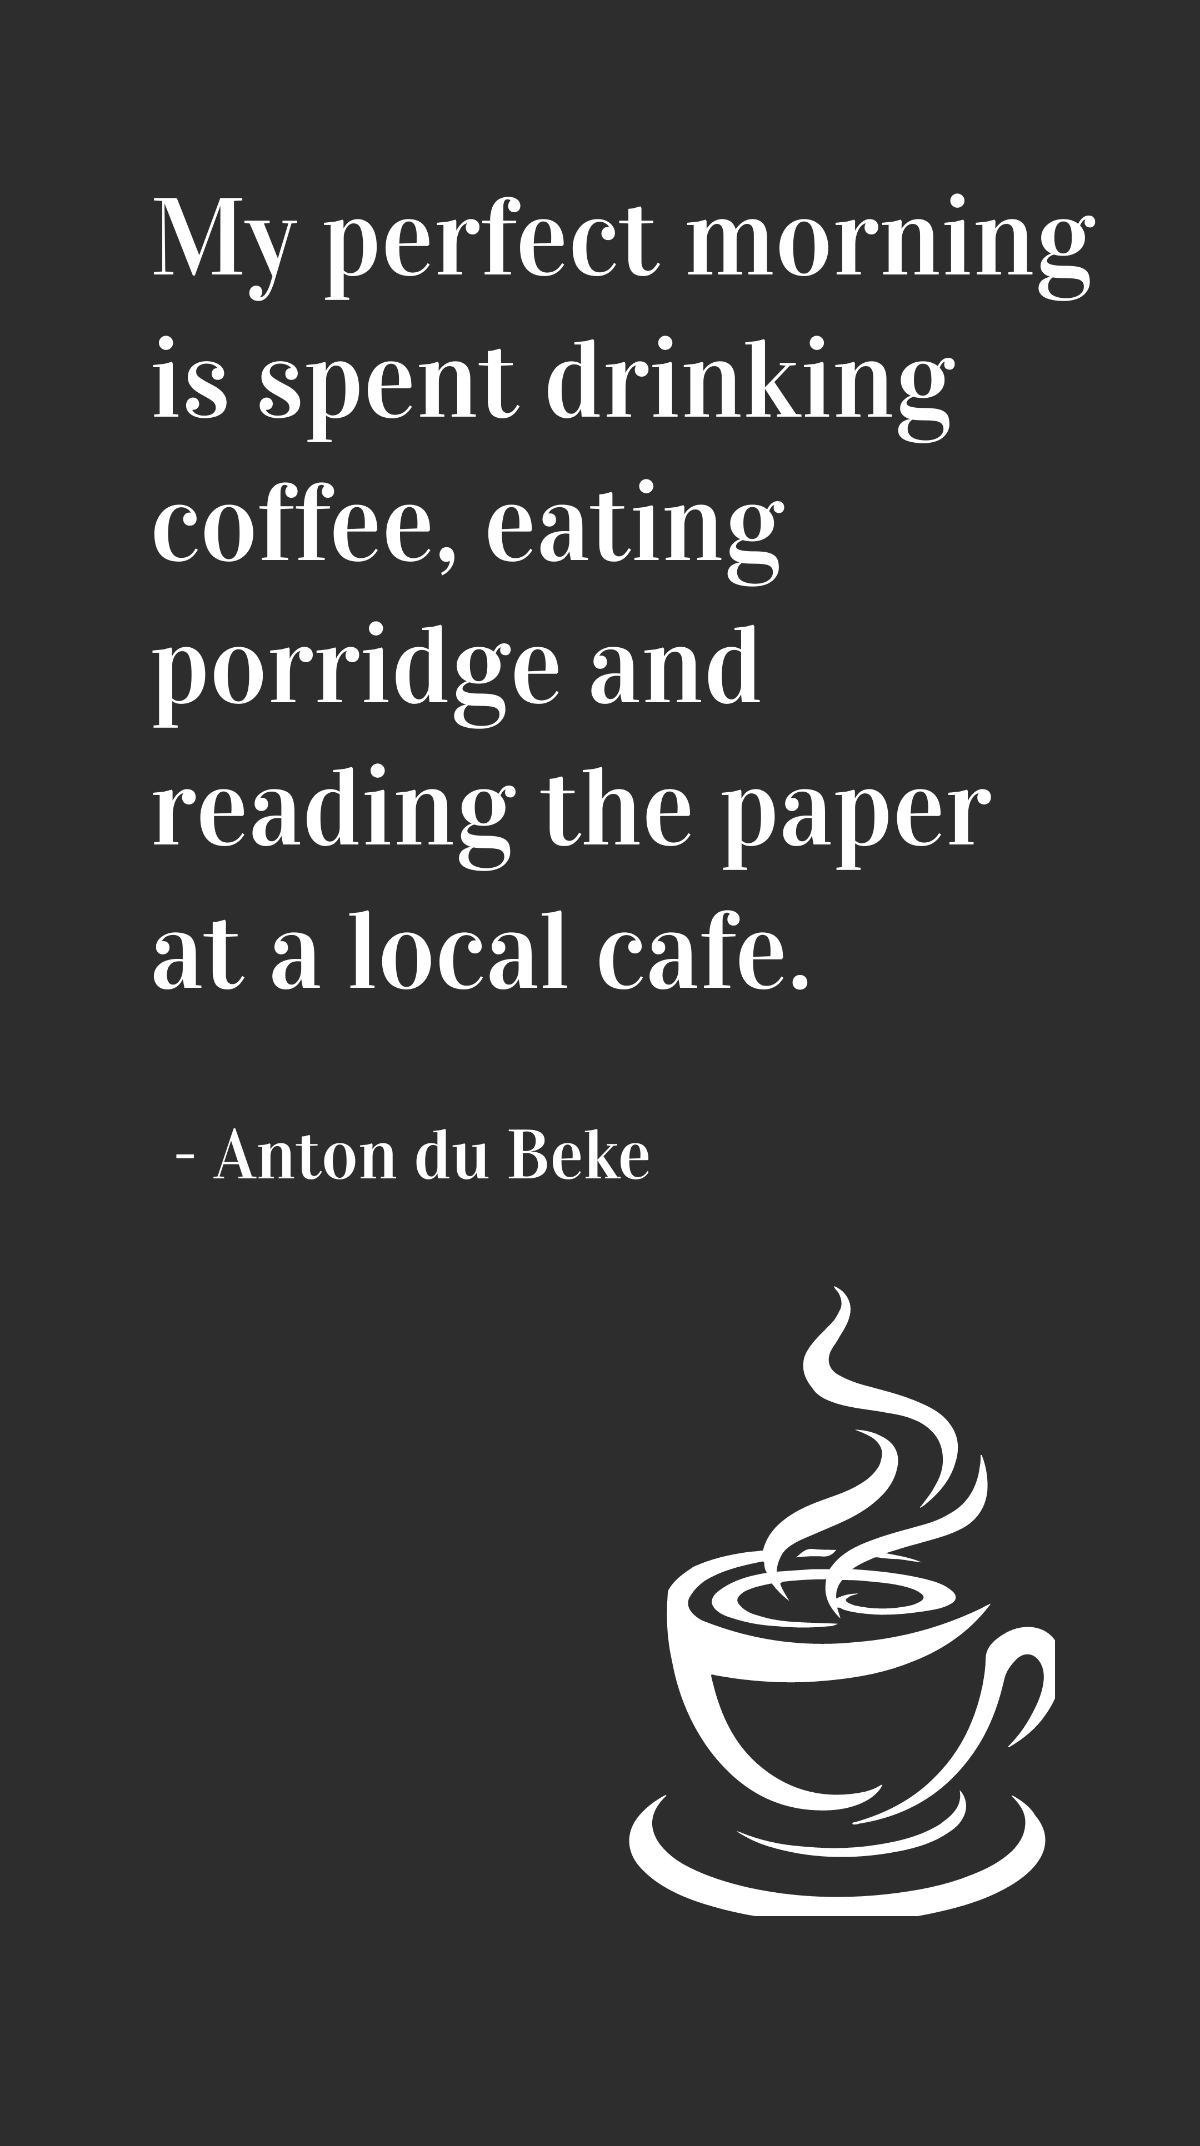 Anton du Beke - My perfect morning is spent drinking coffee, eating porridge and reading the paper at a local cafe.